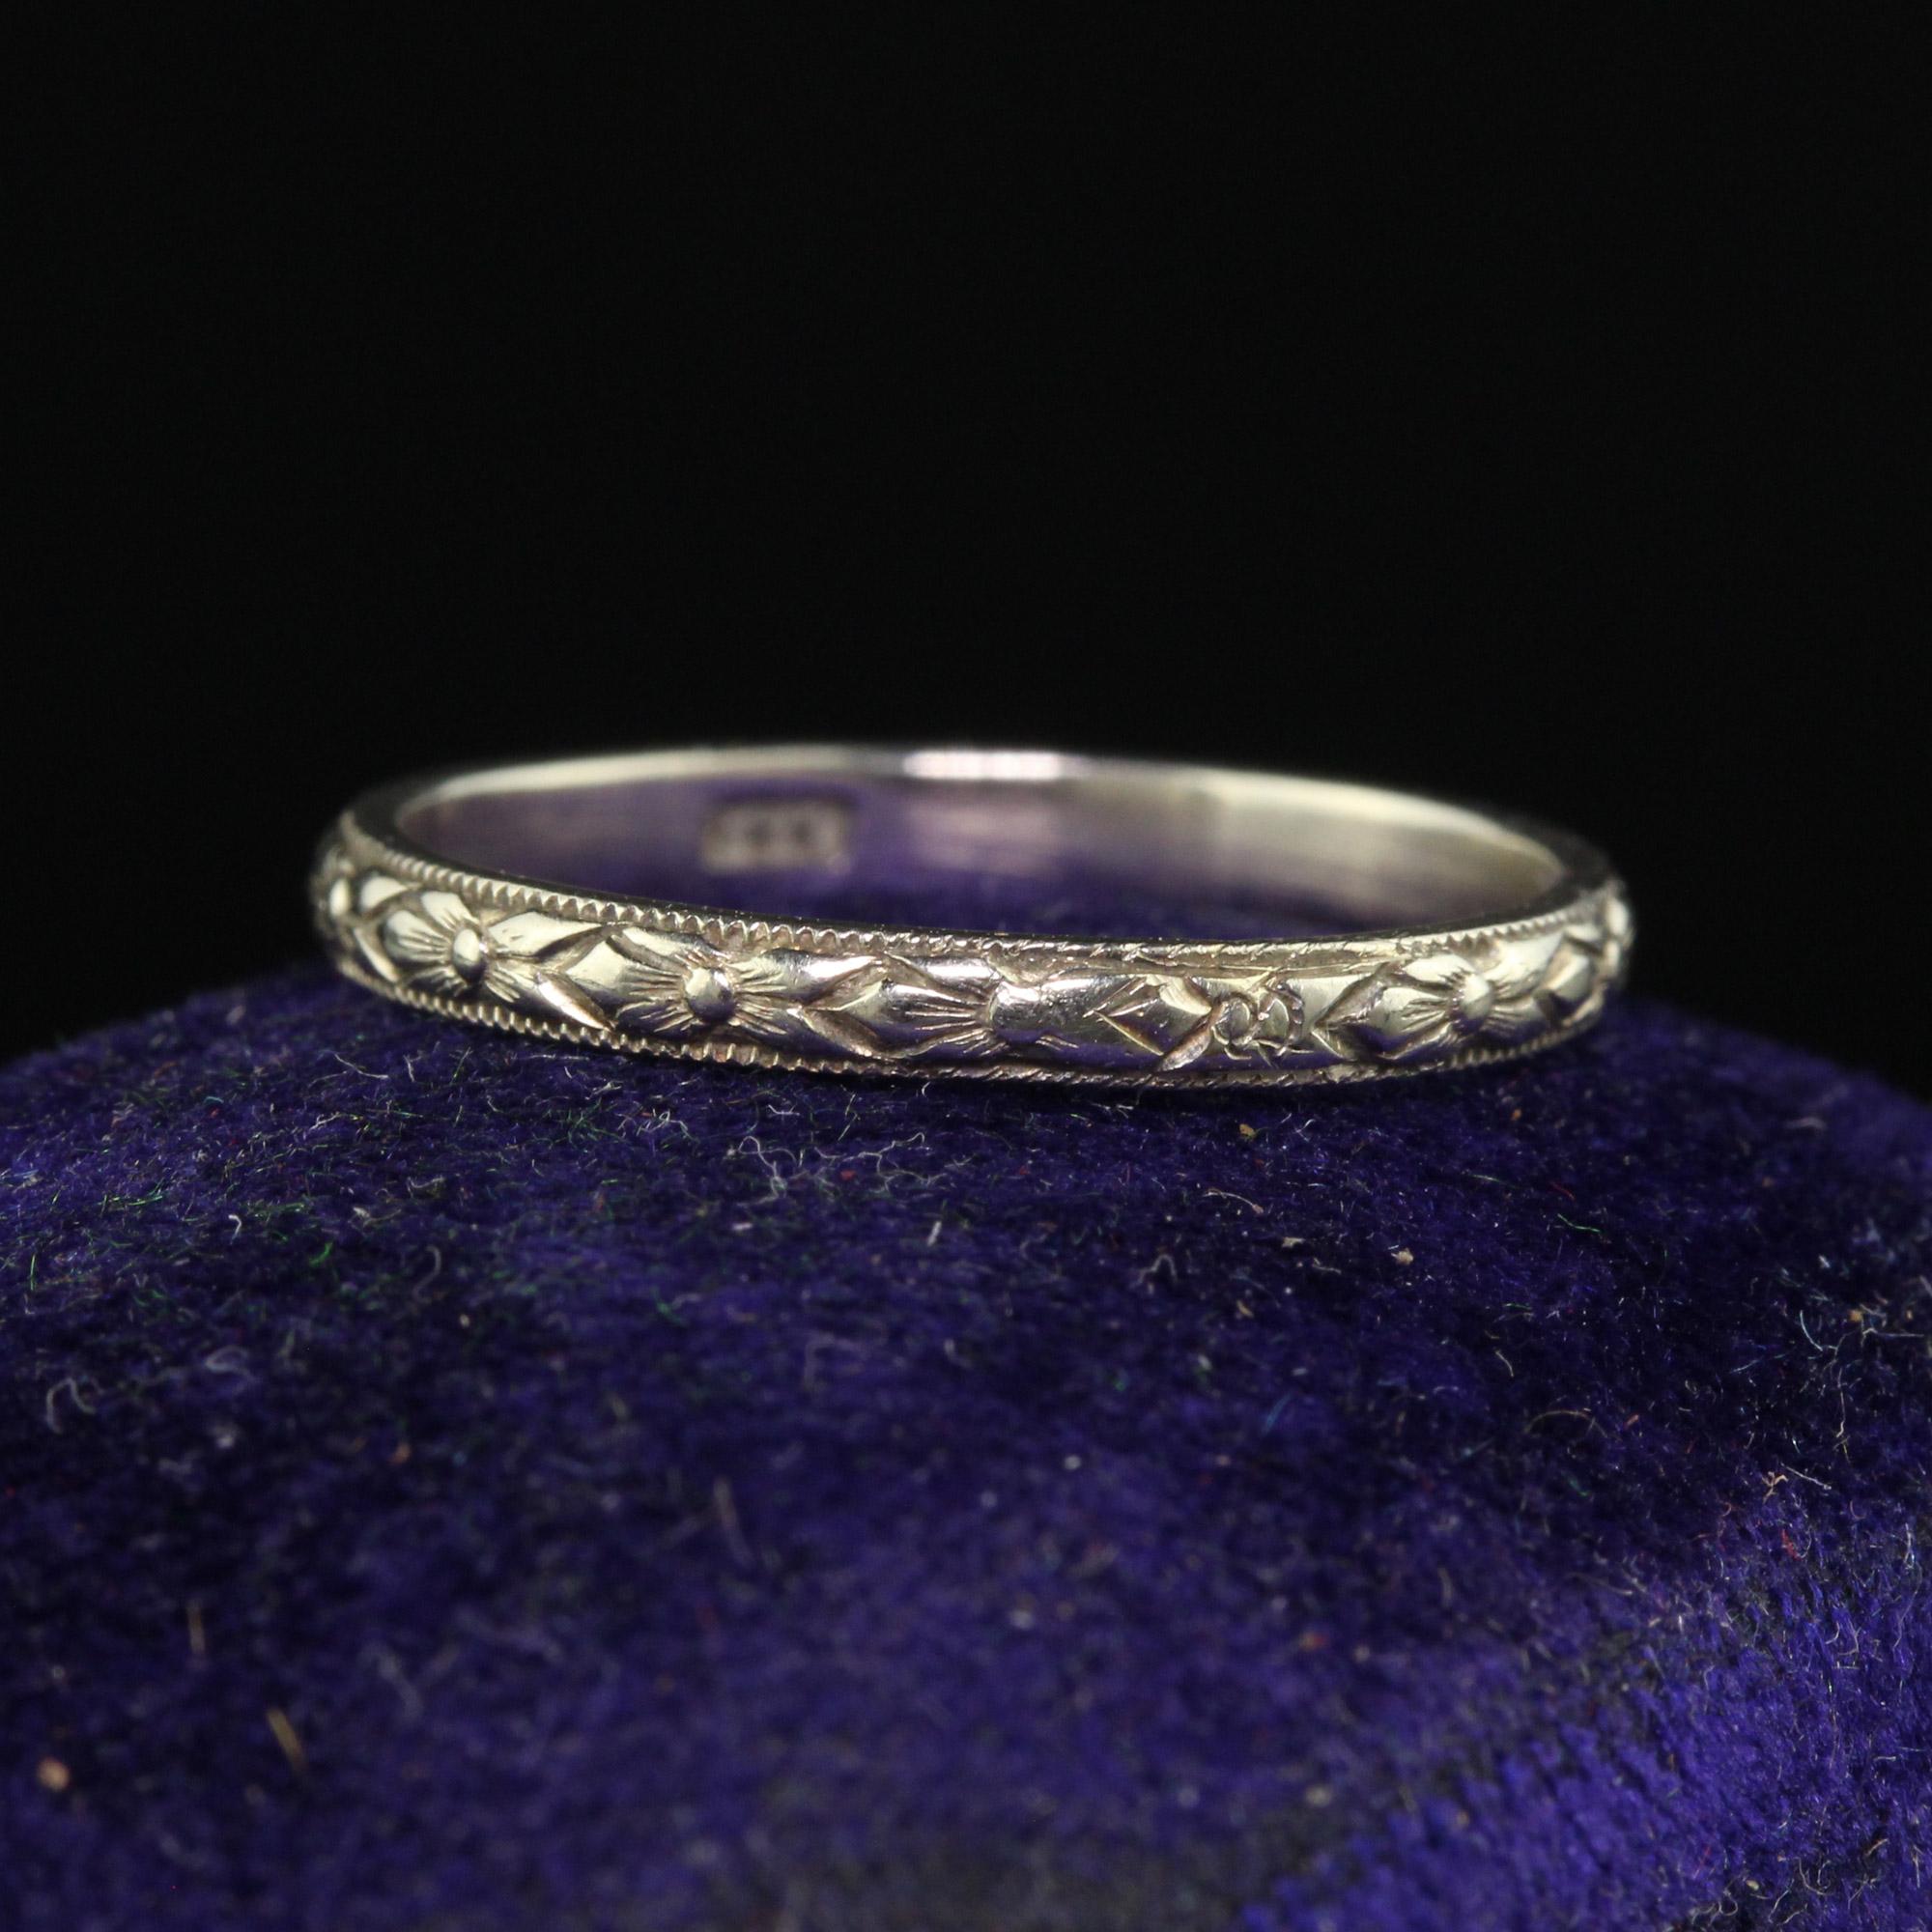 Beautiful Antique Art Deco 18K White Gold Engraved Wedding Band - Size 5 1/2. This gorgeous wedding band is crafted in white gold. The ring has deep engravings going around the entire ring and sits low on the finger. It can be stacked with other